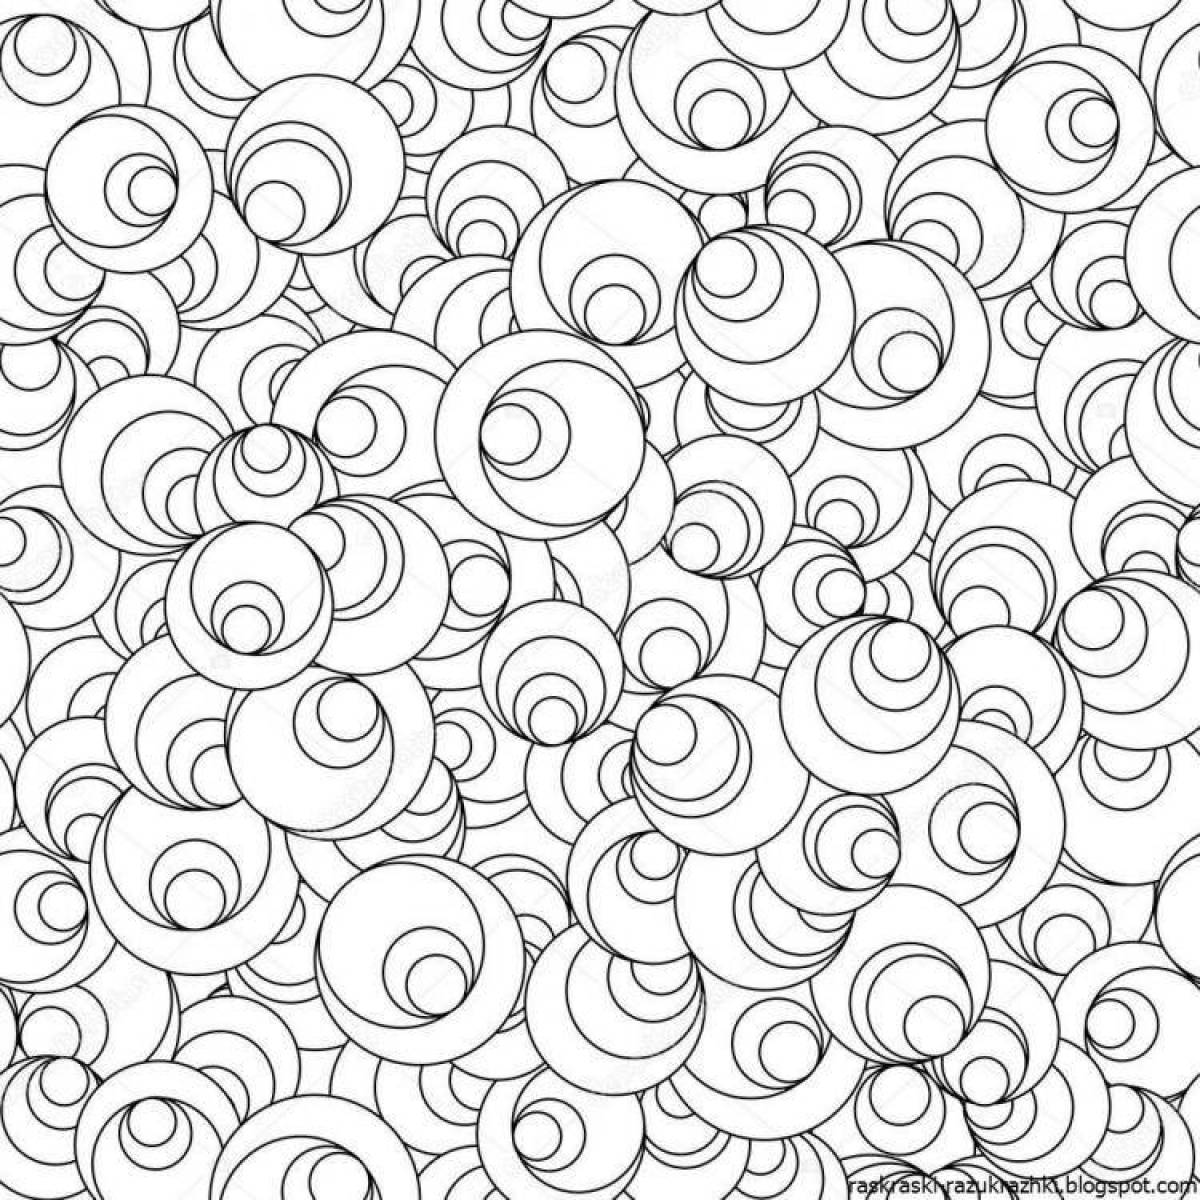 Mysterious coloring page background